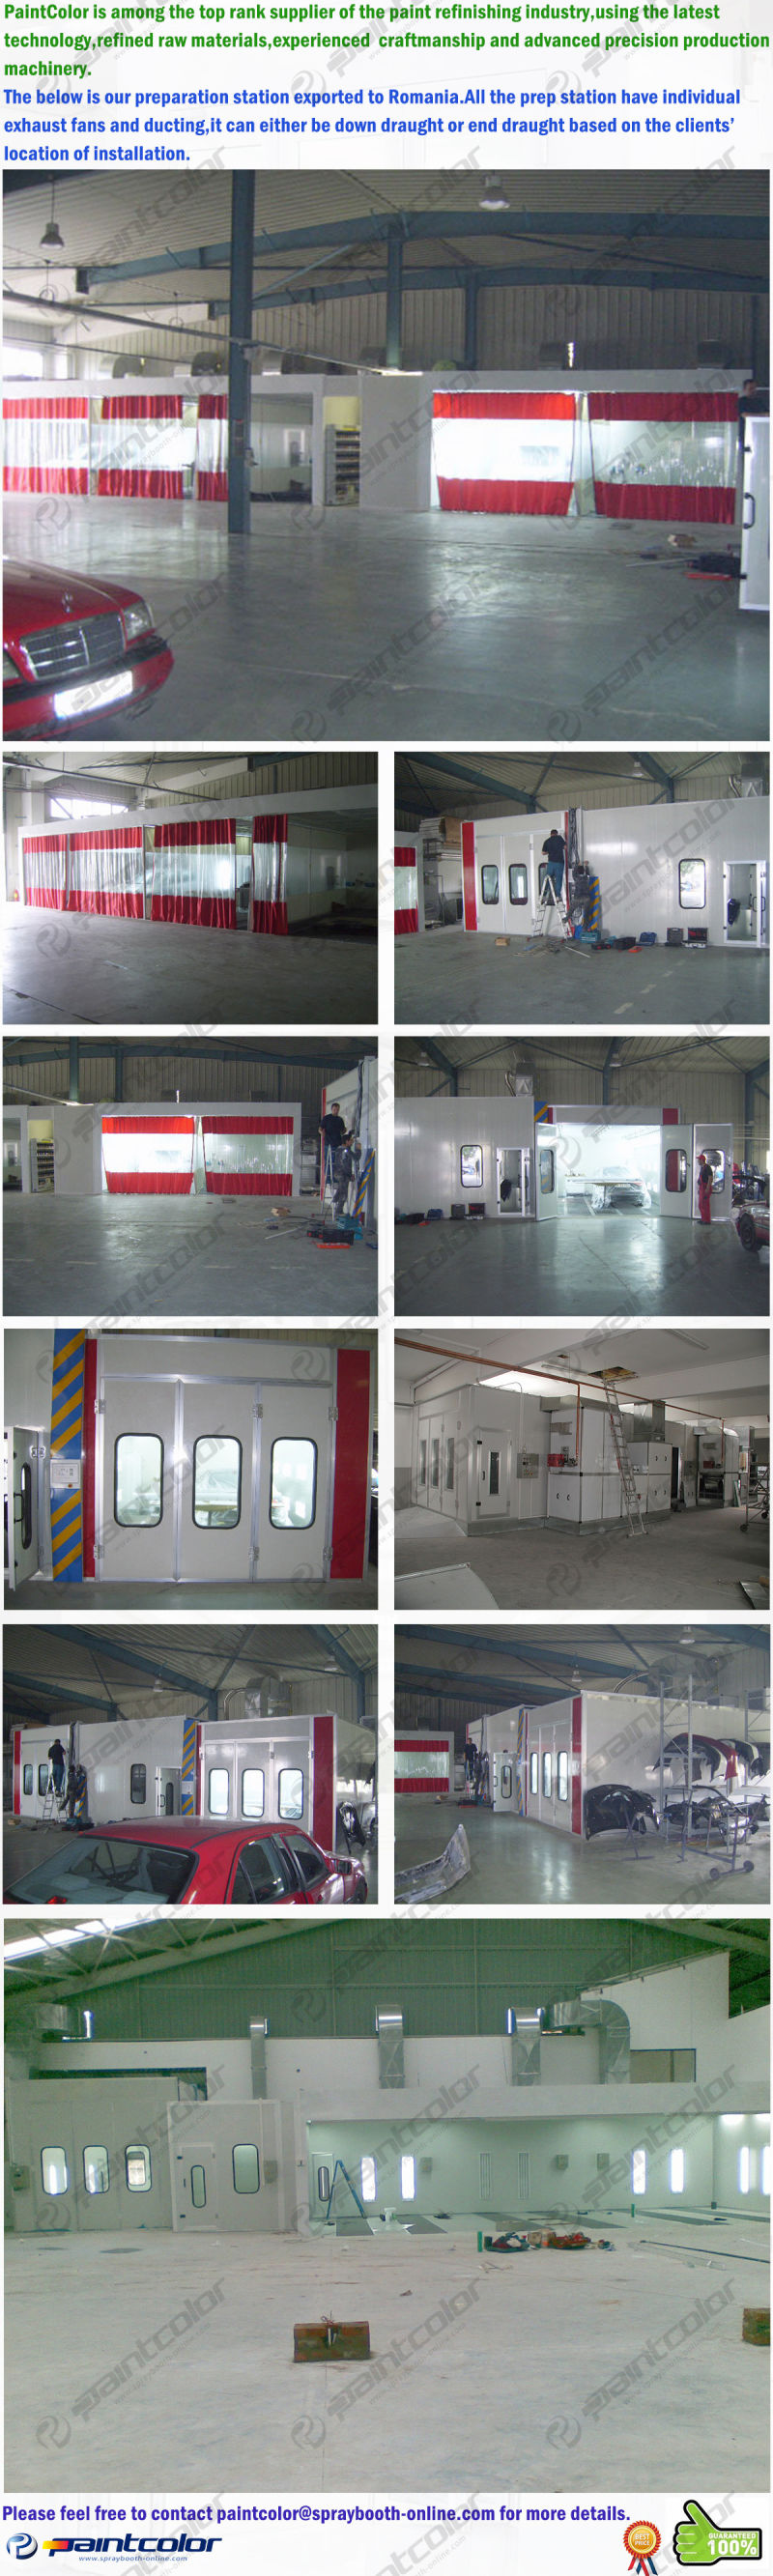 Prep Stations with Curtained Wall Mobile Portable Prep Stations Linked with Paint Chamber Hot Sales From Paintcolor Spraybooth